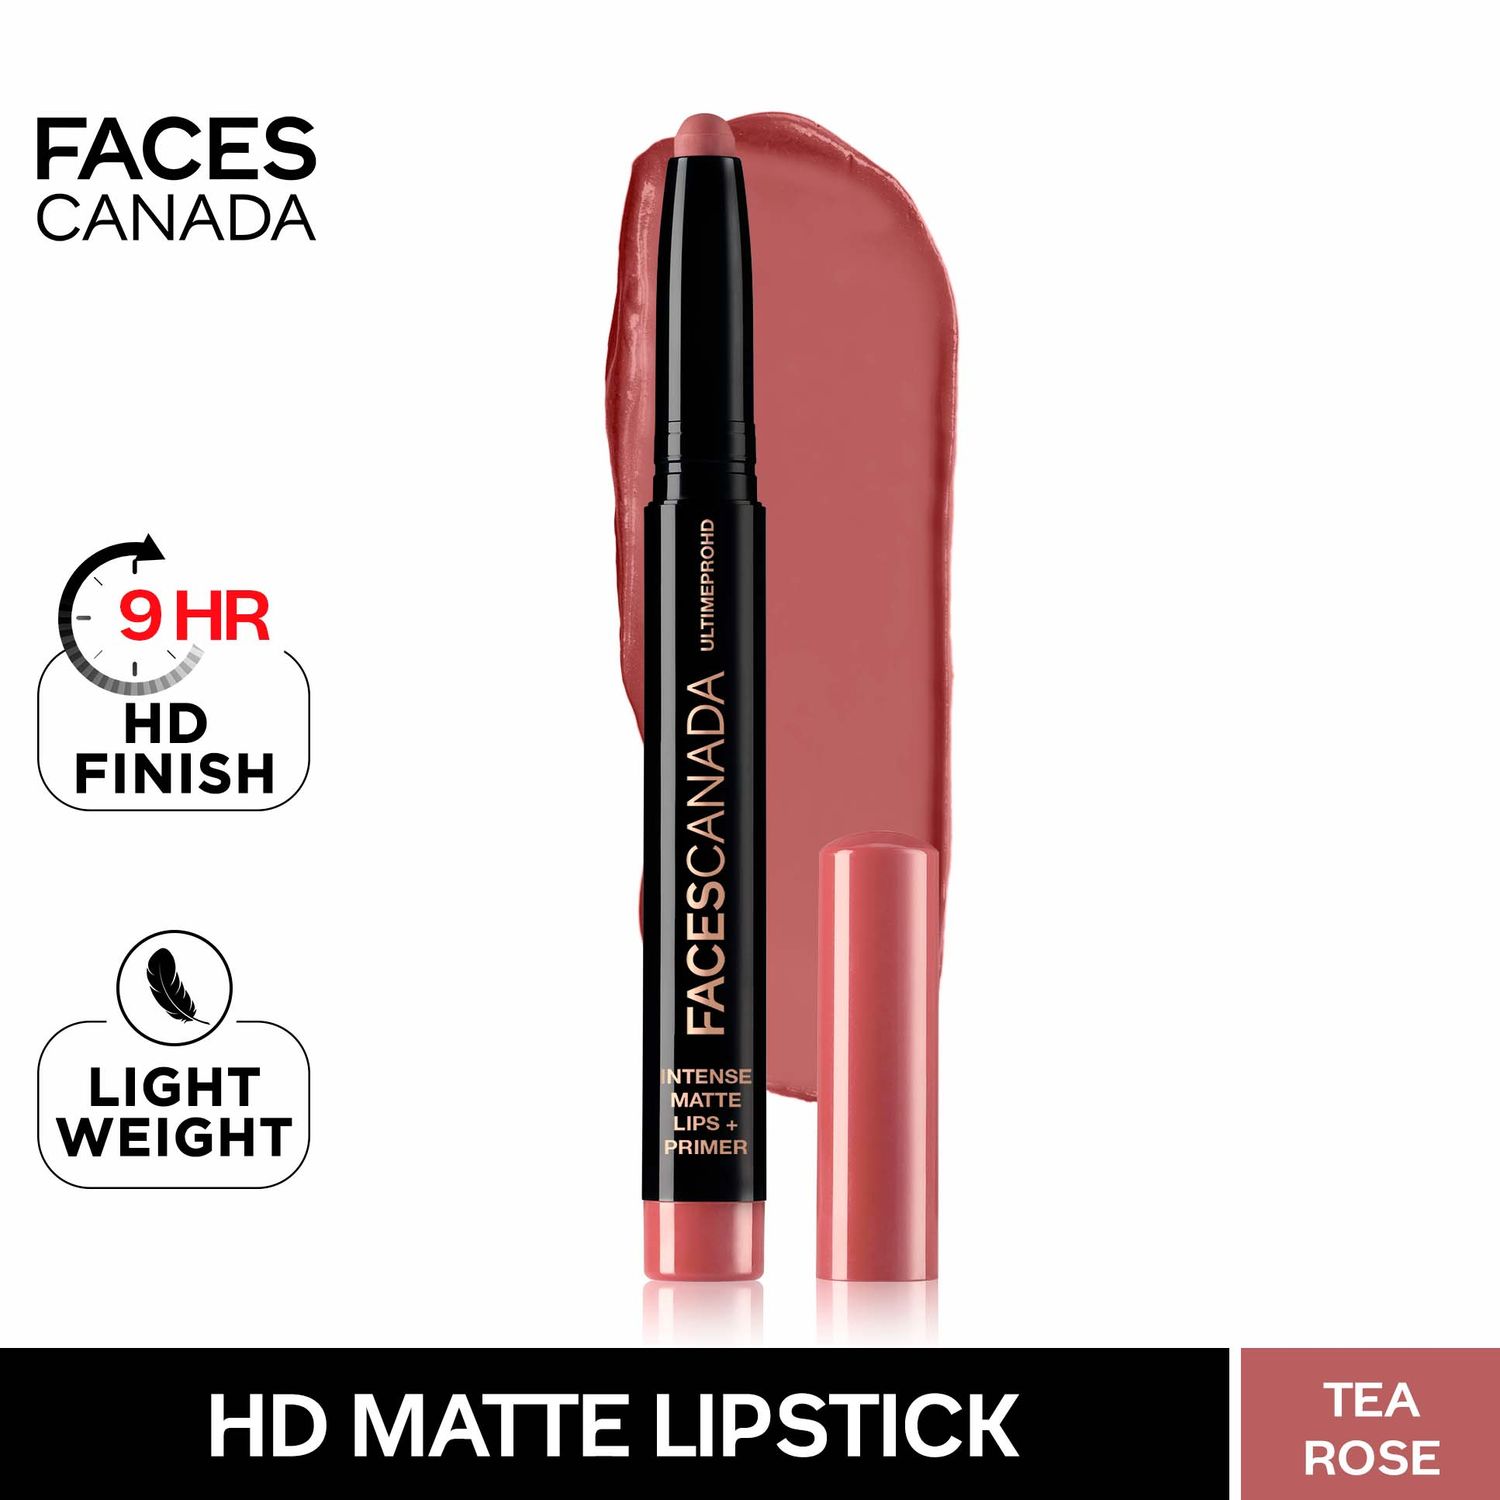 Faces Canada HD Intense Matte Lipstick | Feather light comfort | 10 hrs stay| Primer infused | Flawless HD finish | Made in Germany | Tea Rose 1.4g